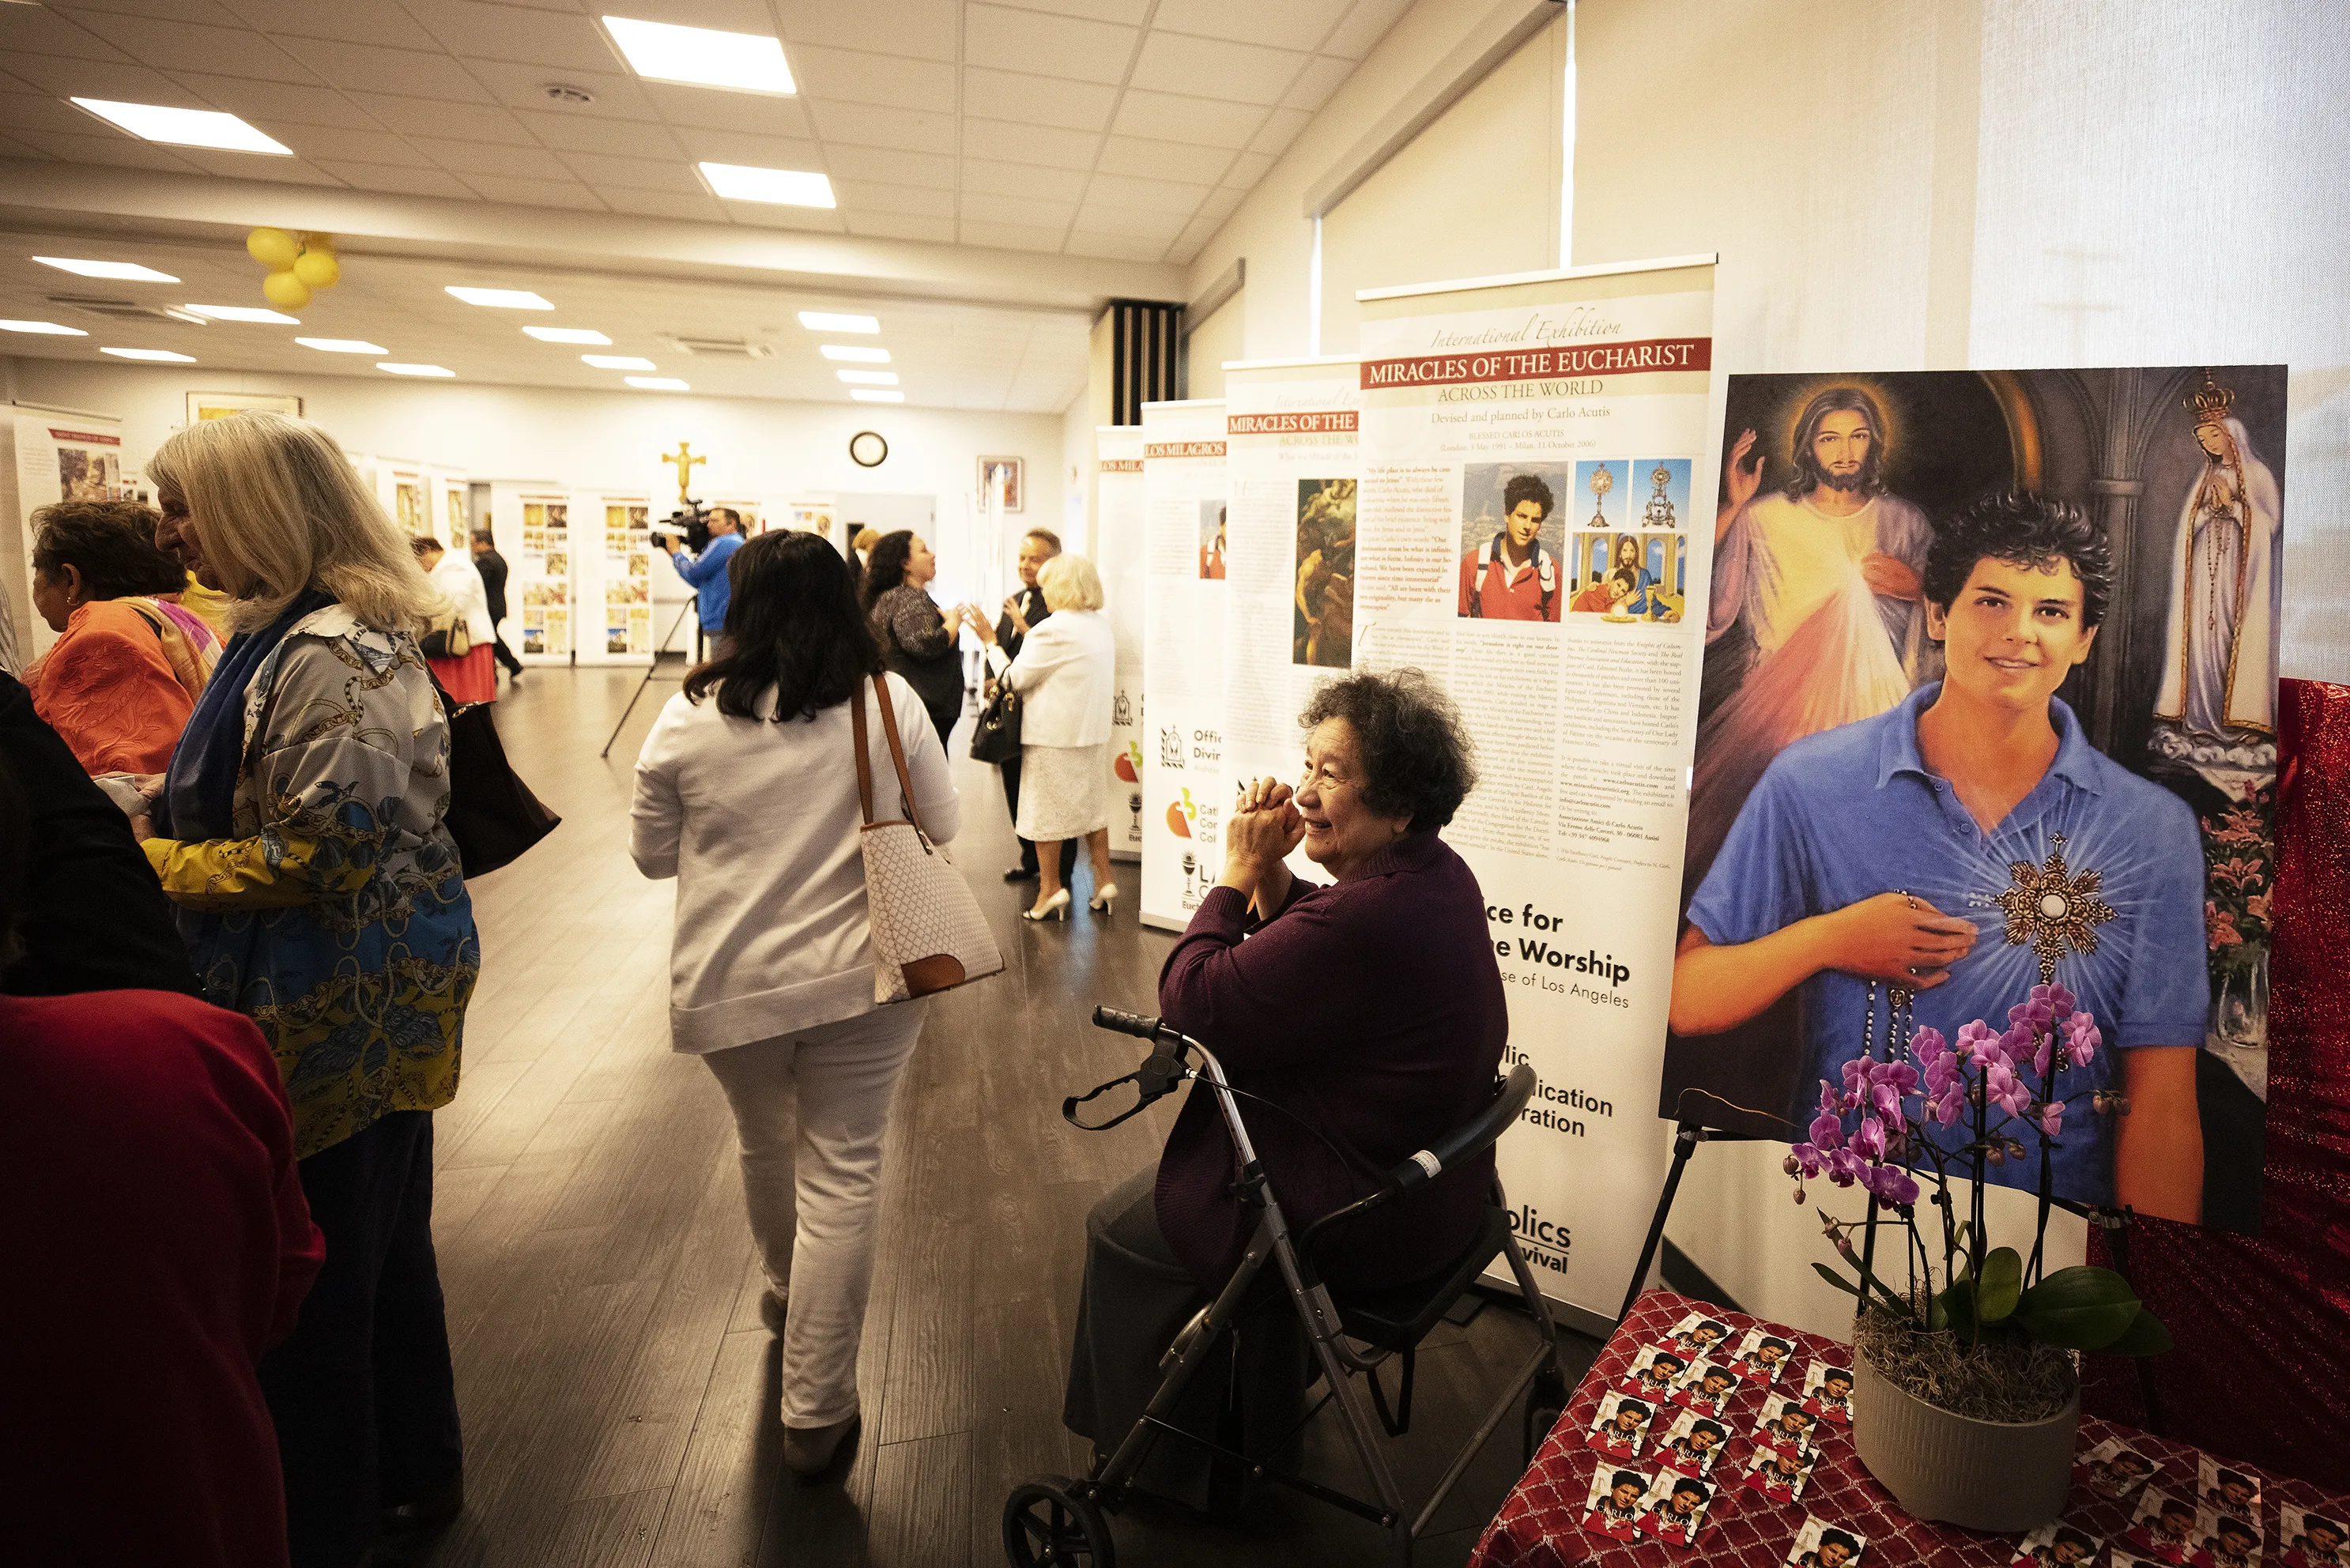 Visitors check out the exhibit on Eucharistic miracles at Christ the King Church near Hollywood on June 11, the day it opened.?w=200&h=150